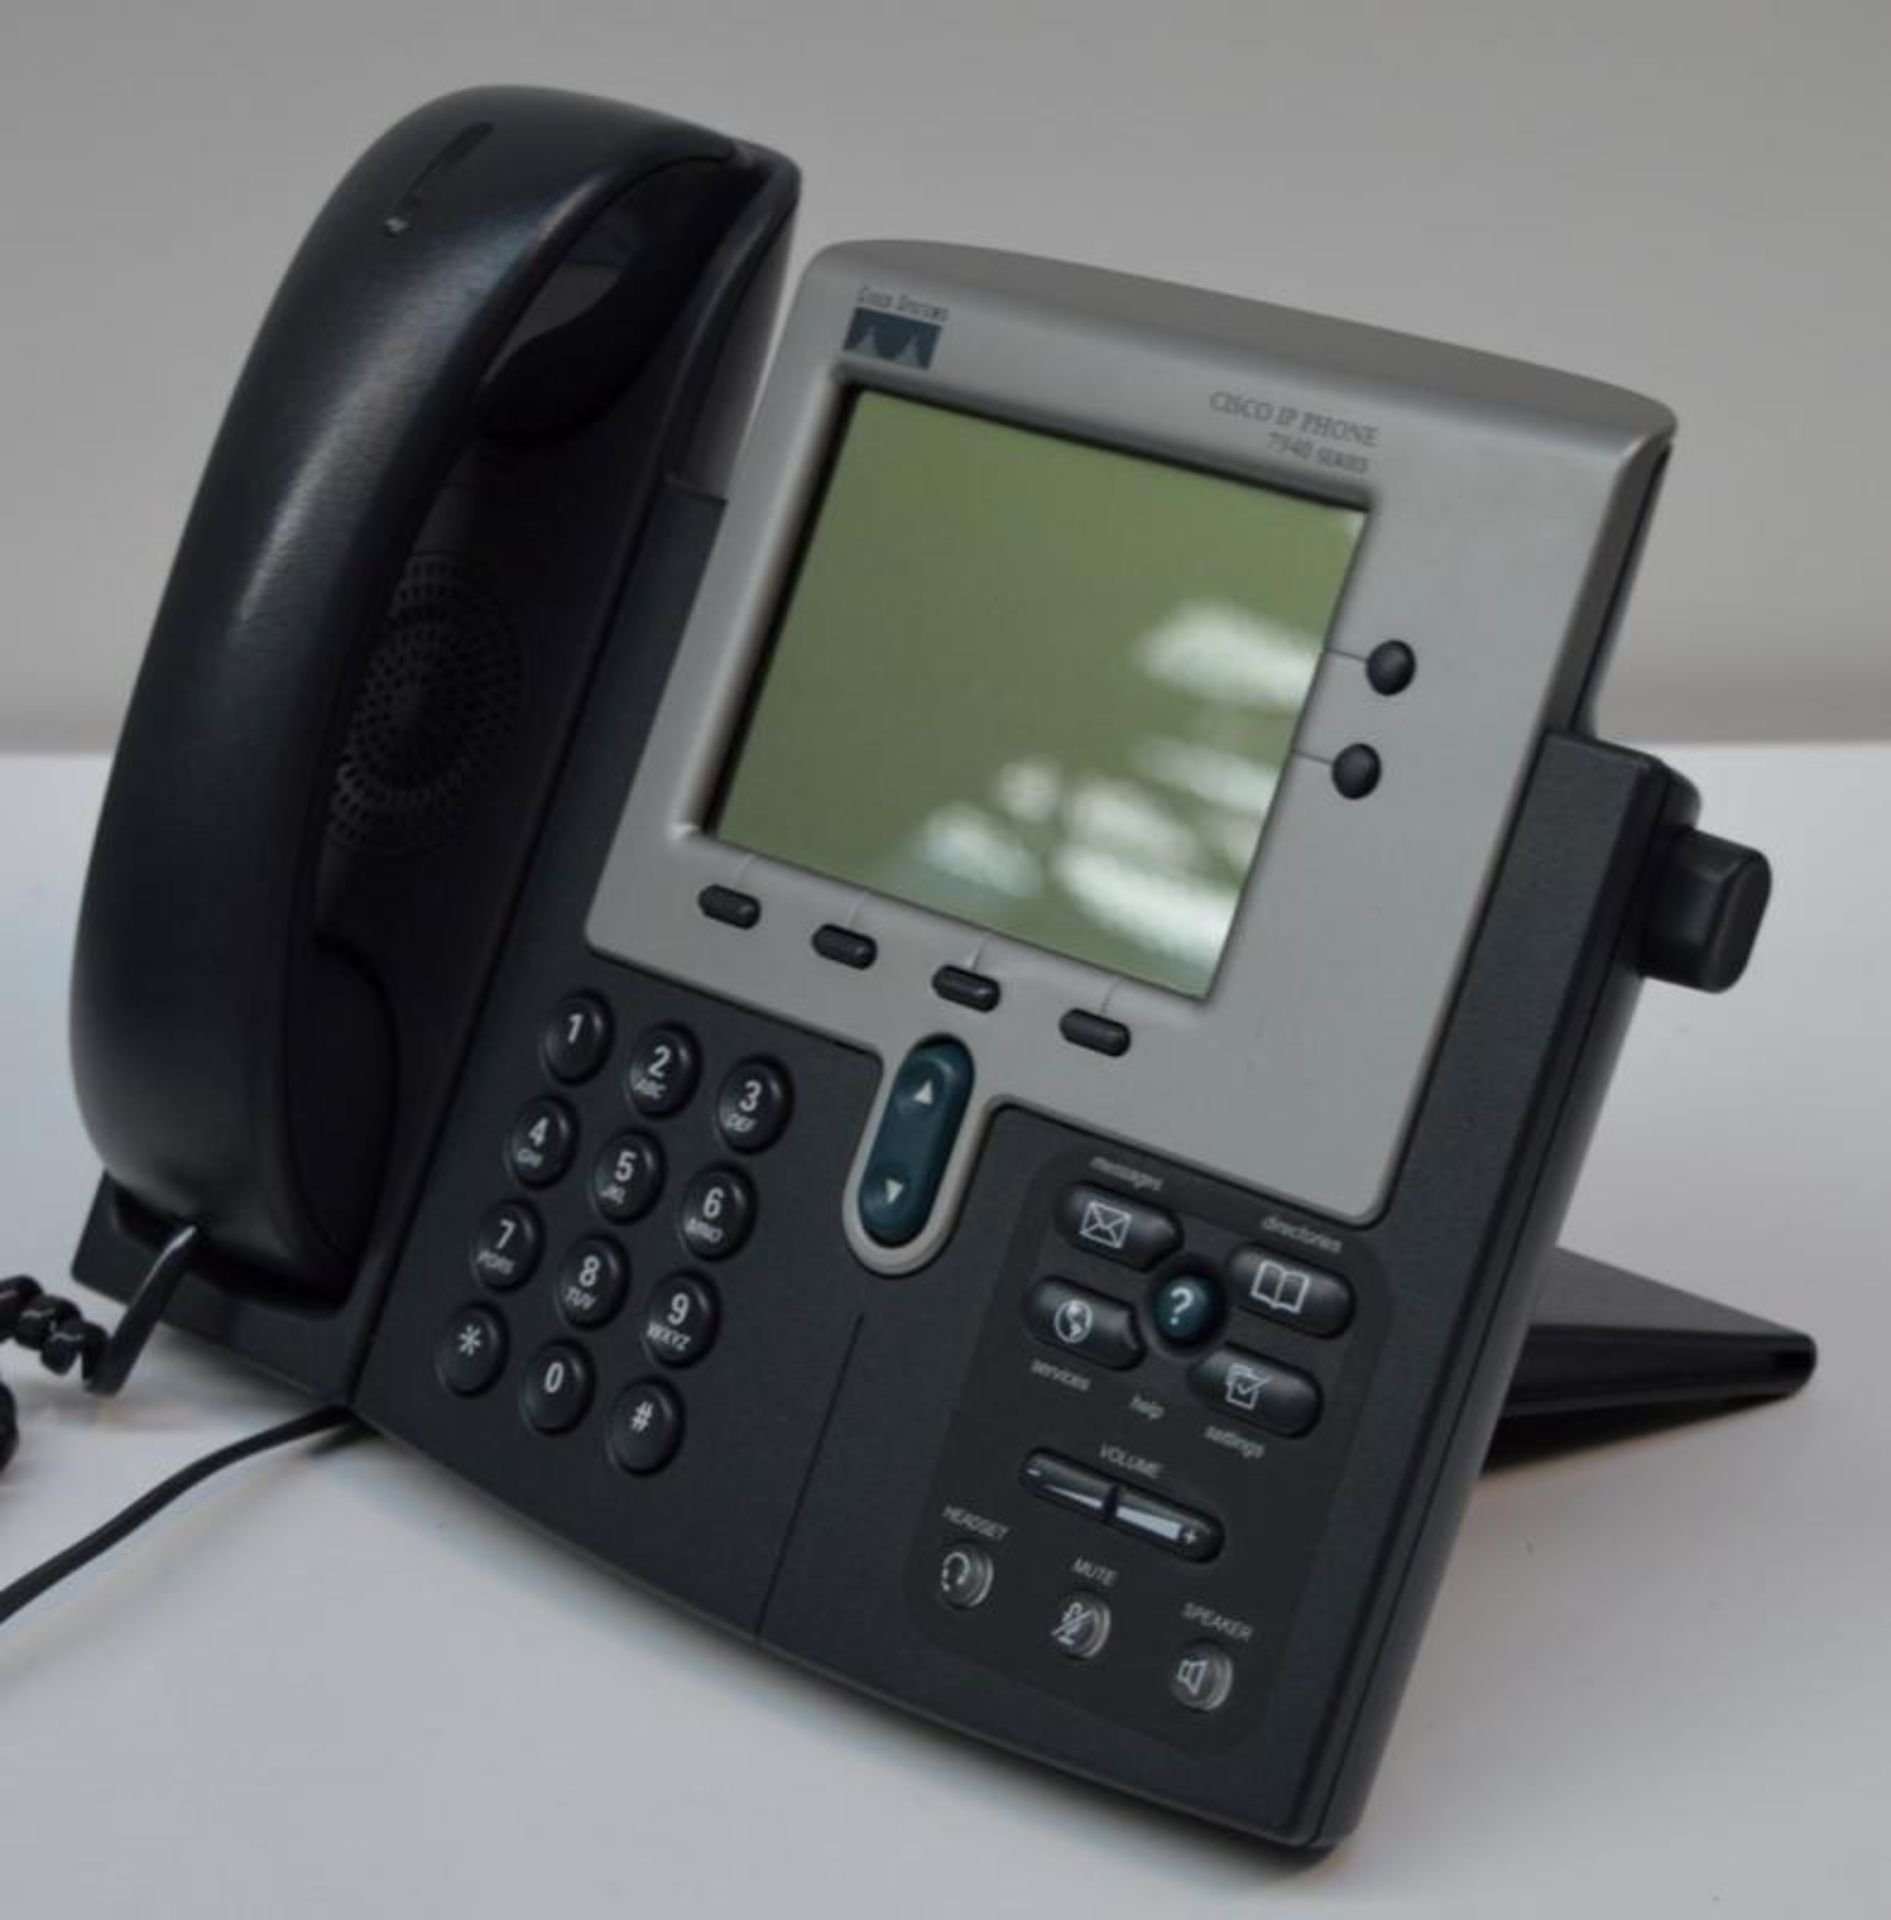 4 x Cisco CP-7940G IP Phone VOIP Telephone LCD Display Phones - Removed From a Working Office Enviro - Image 6 of 6